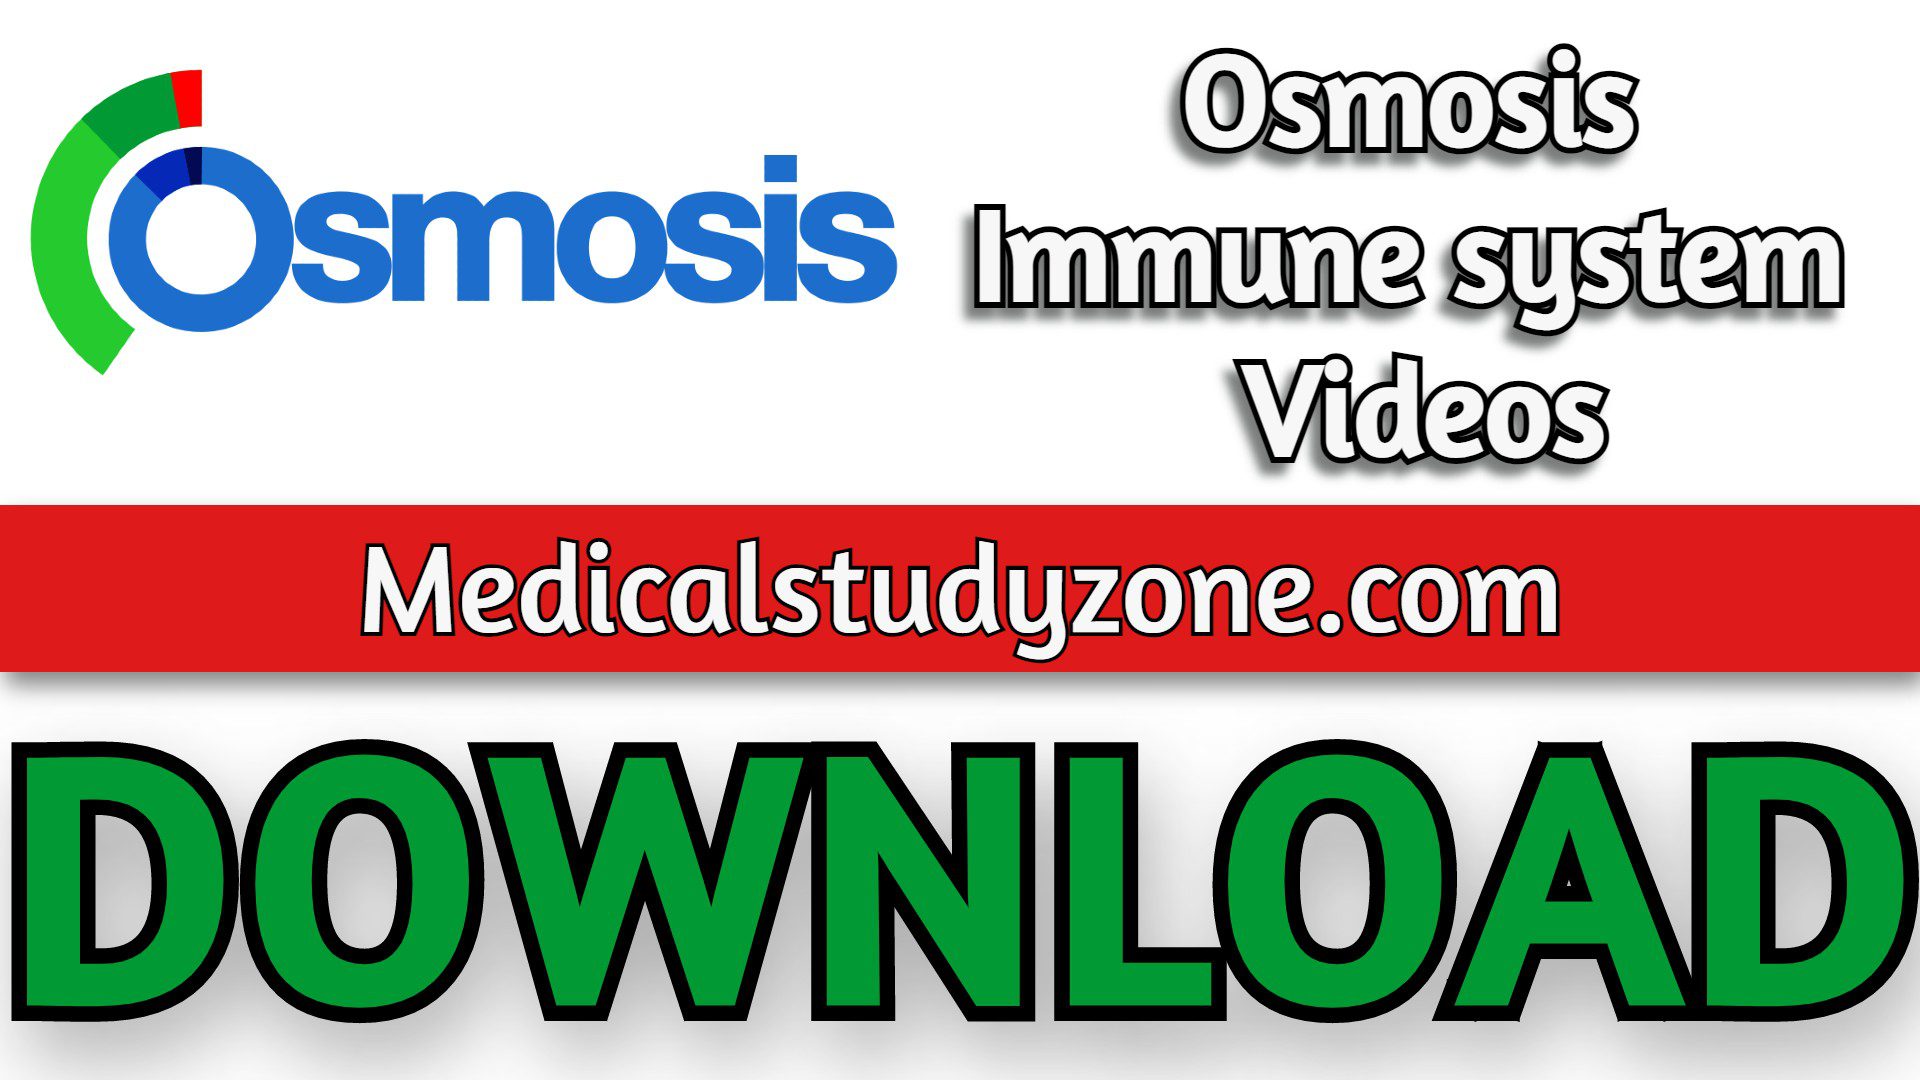 Osmosis Immune system Videos 2022 Free Download